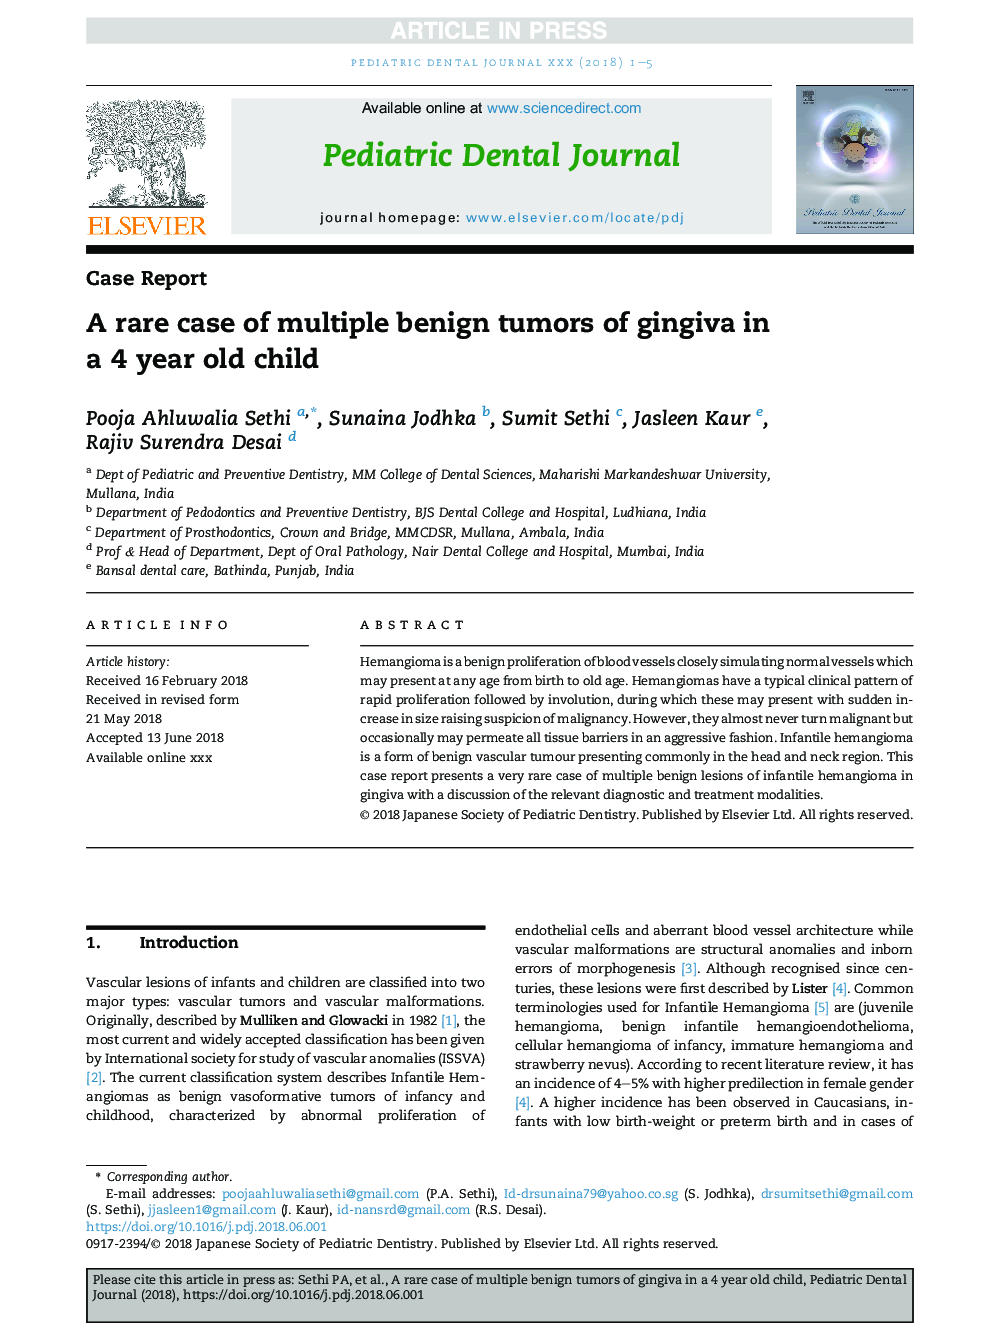 A rare case of multiple benign tumors of gingiva in a 4 year old child